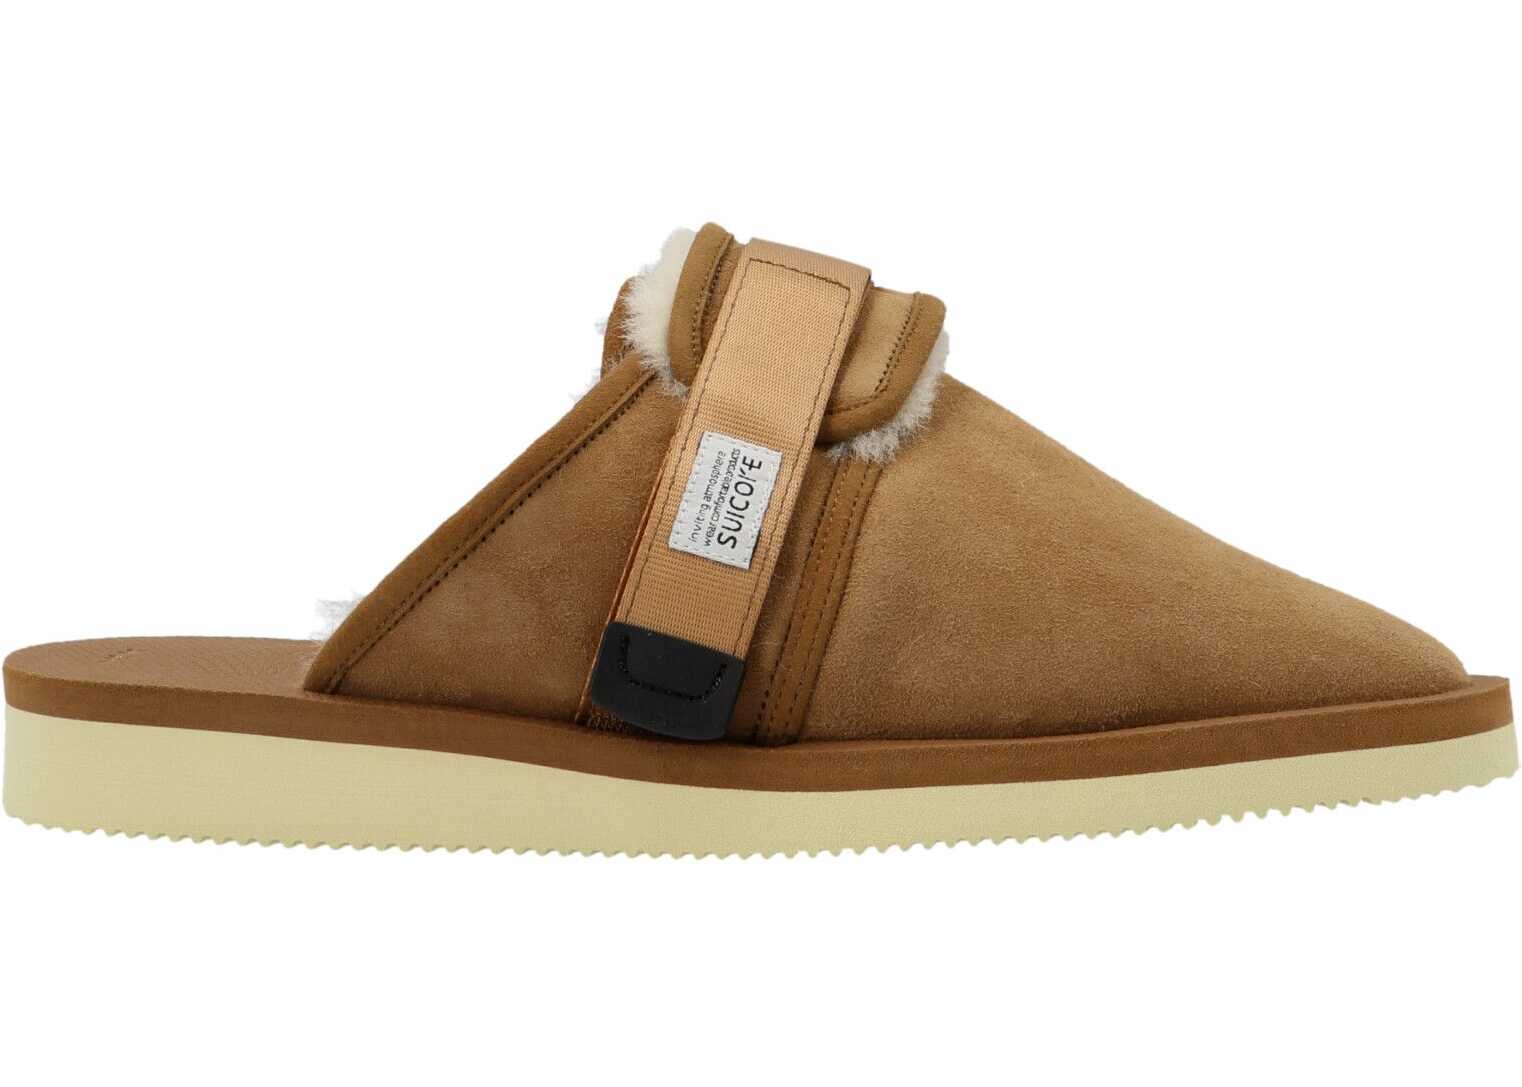 Suicoke Other Materials Sandals BROWN